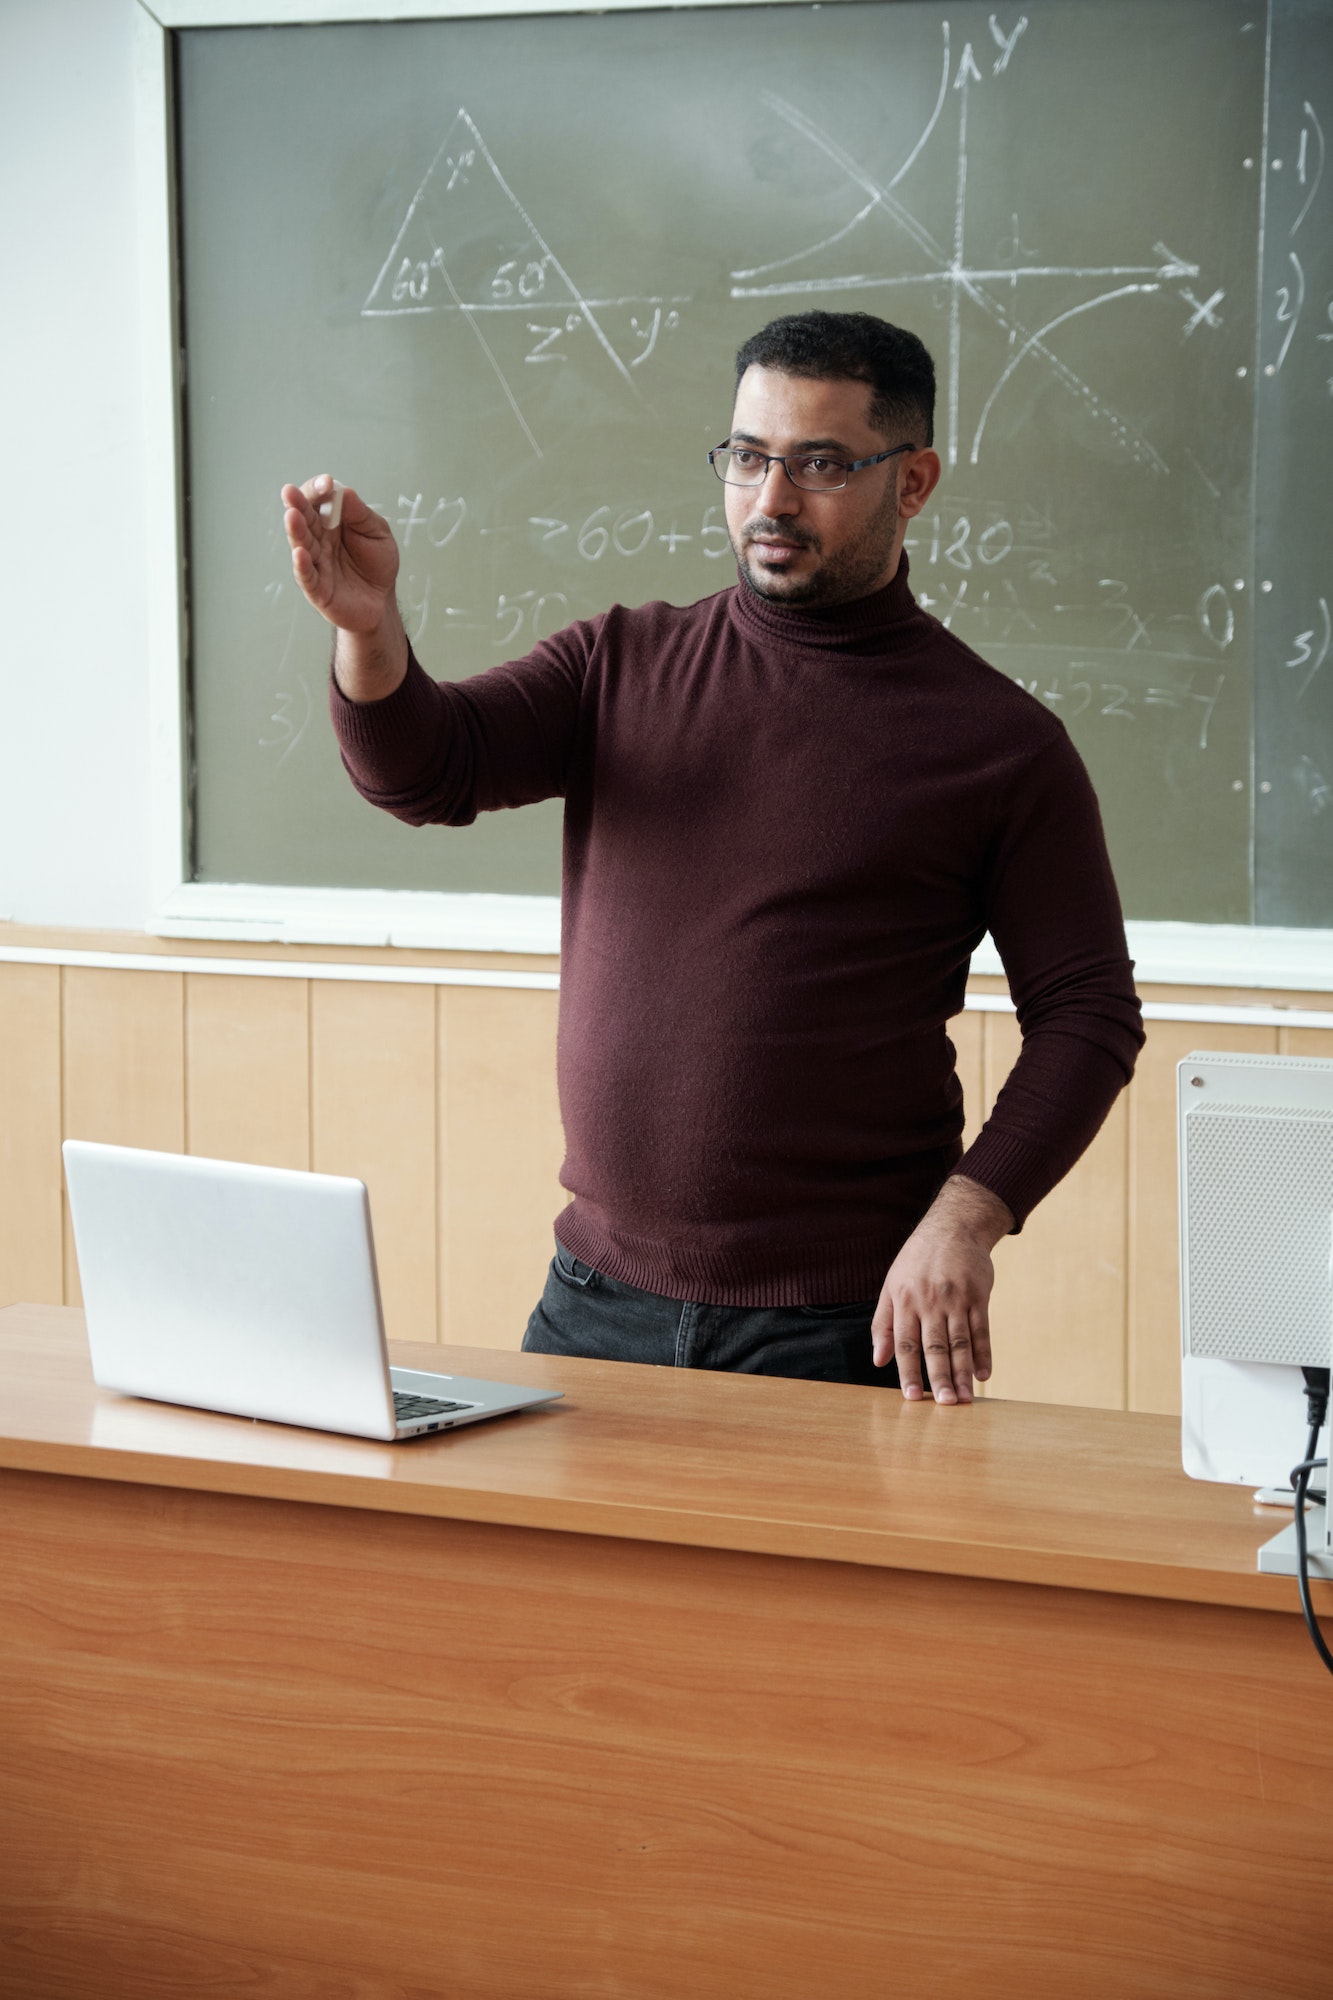 Mixed-race male in casualwear holding piece of chalk while explaining something to students